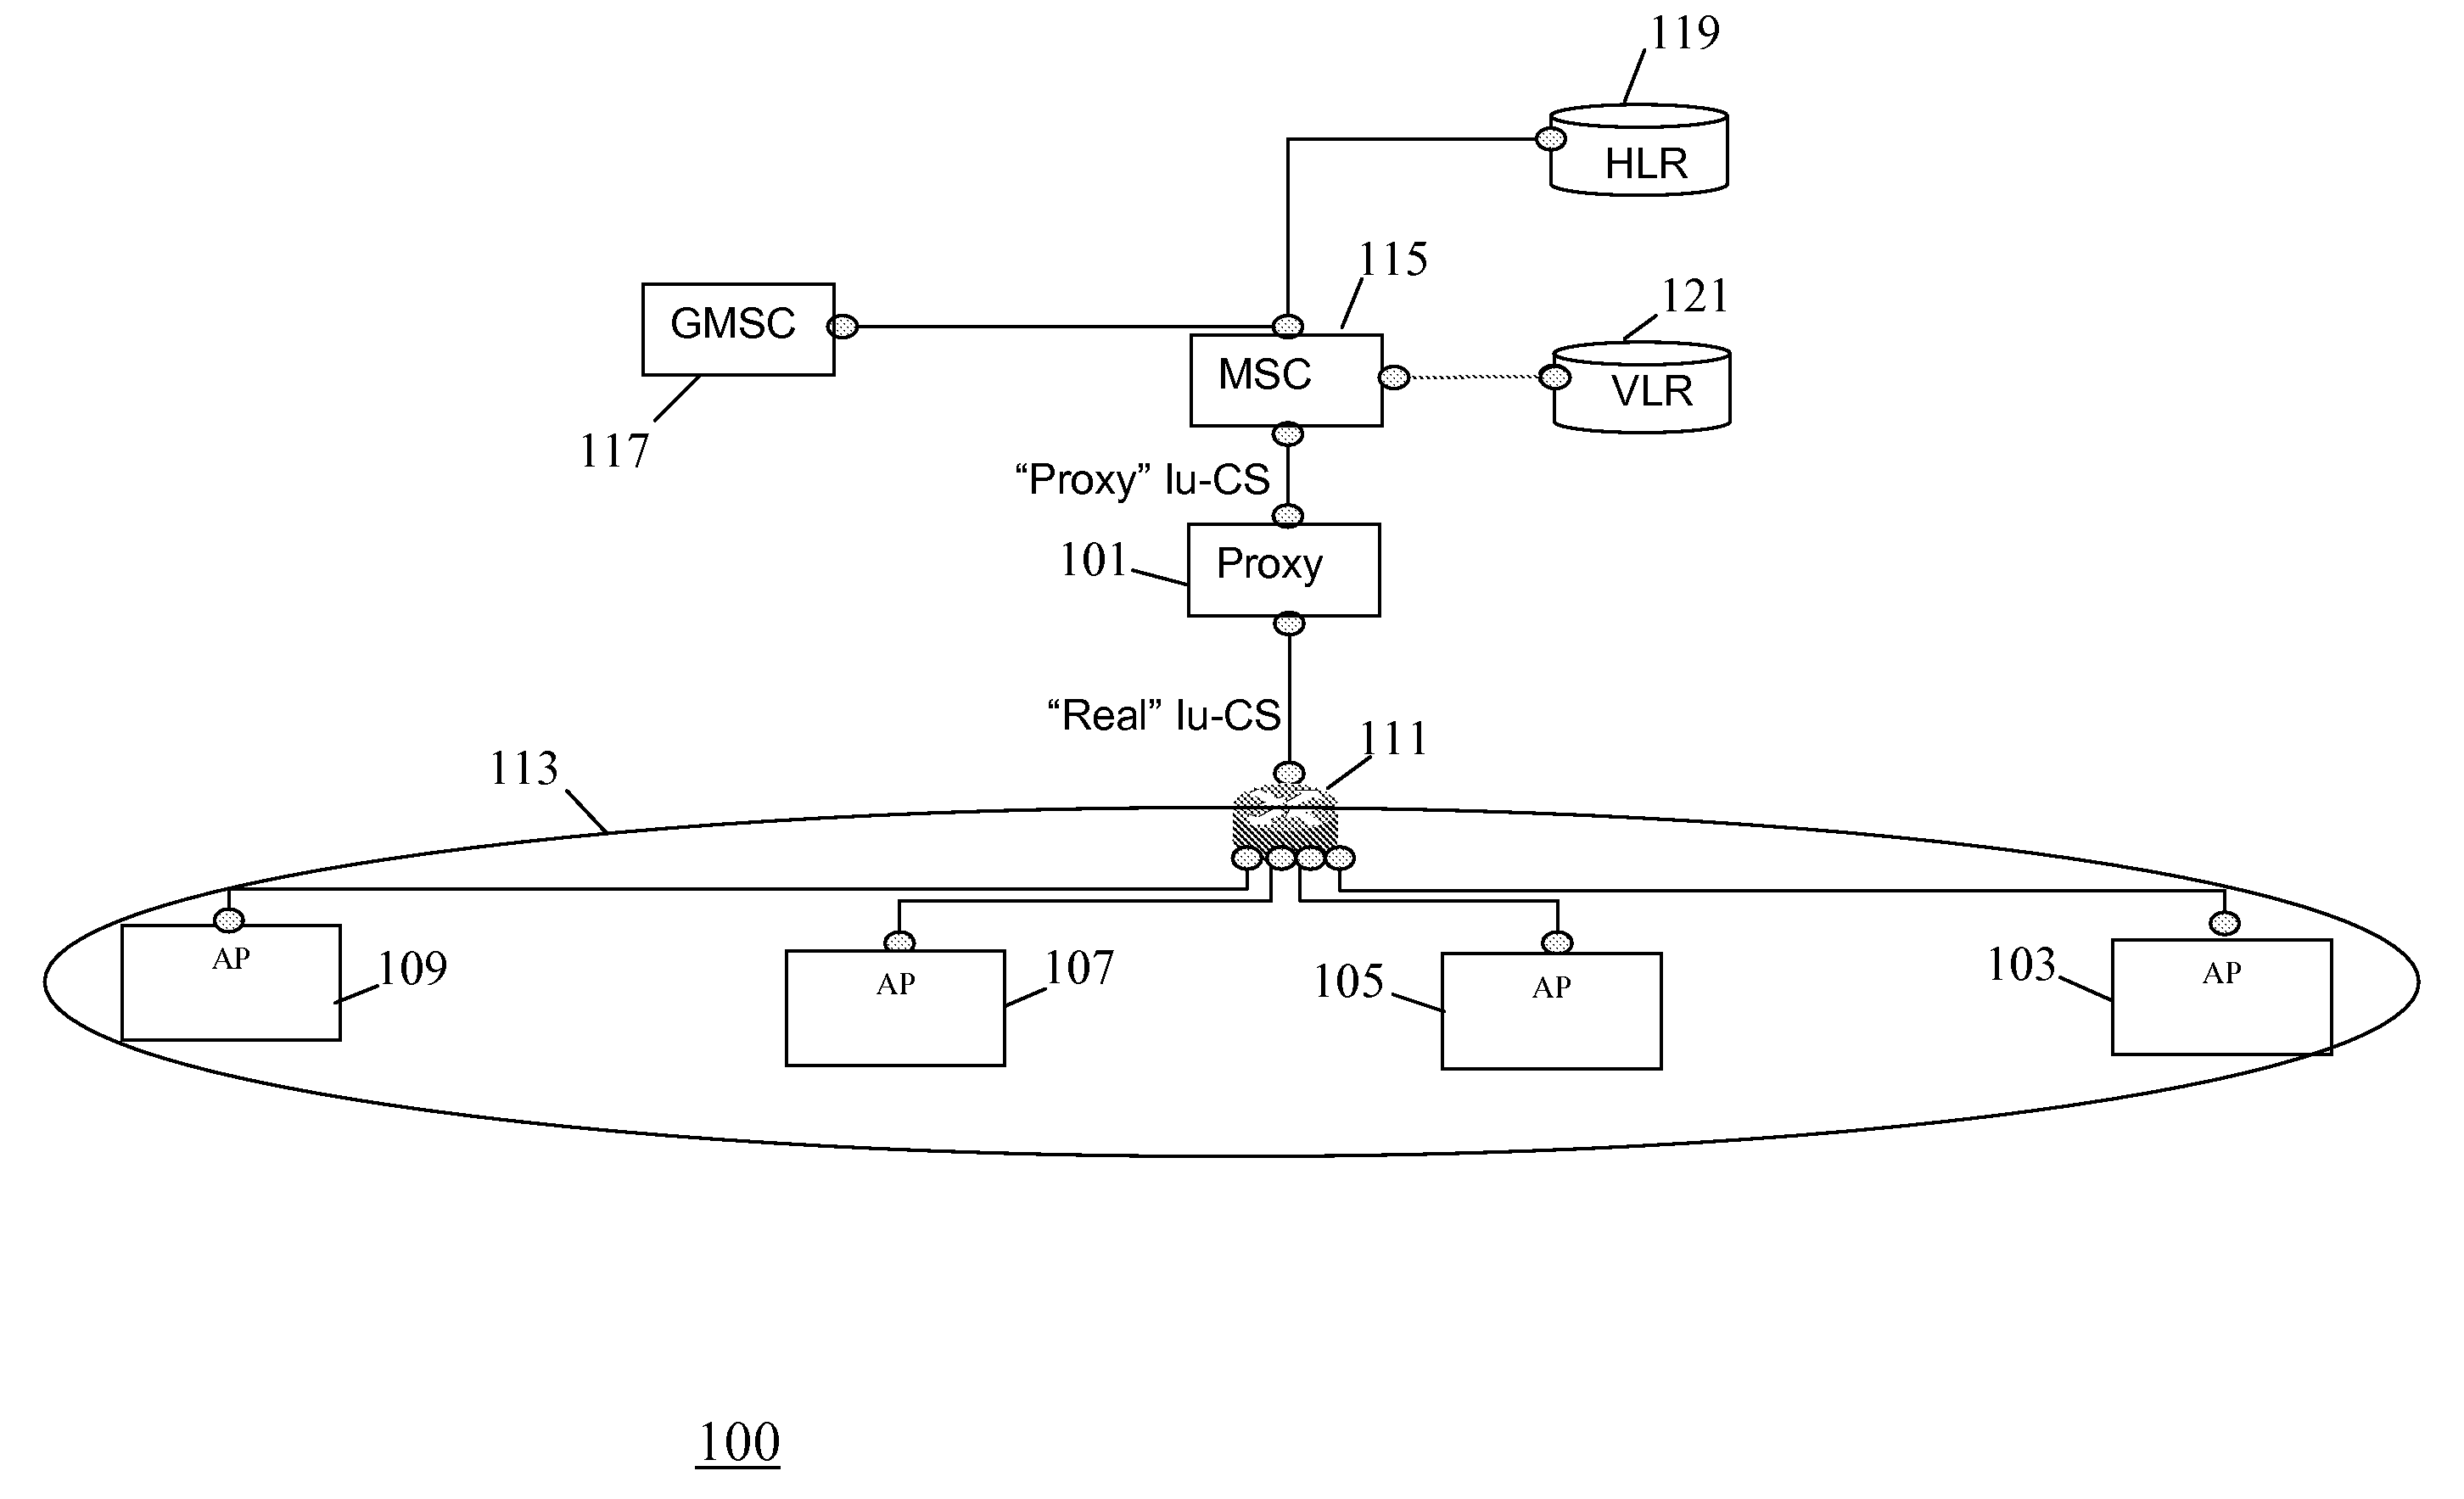 Network for a cellular communication system and a method of operation therefor